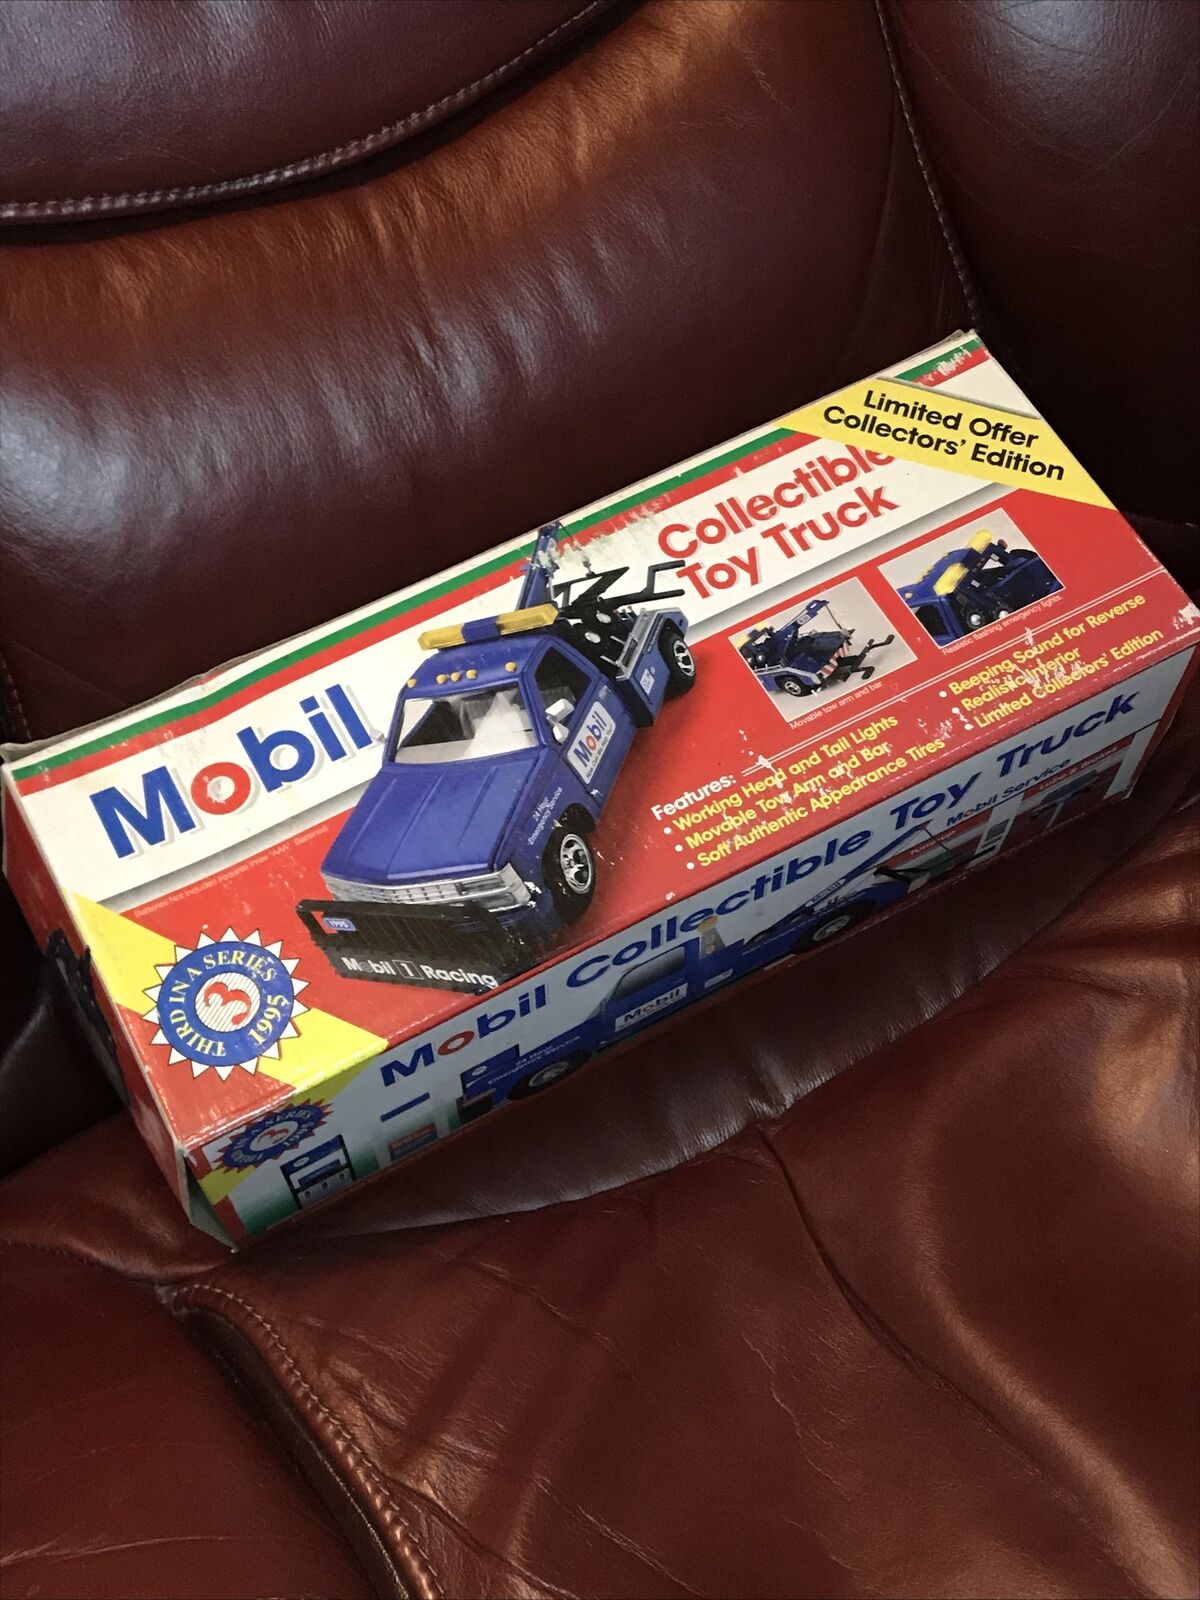 Mobil Tow Truck 1995 Wrecker Toy 1:24 Scale Third Series Collectable Osterman